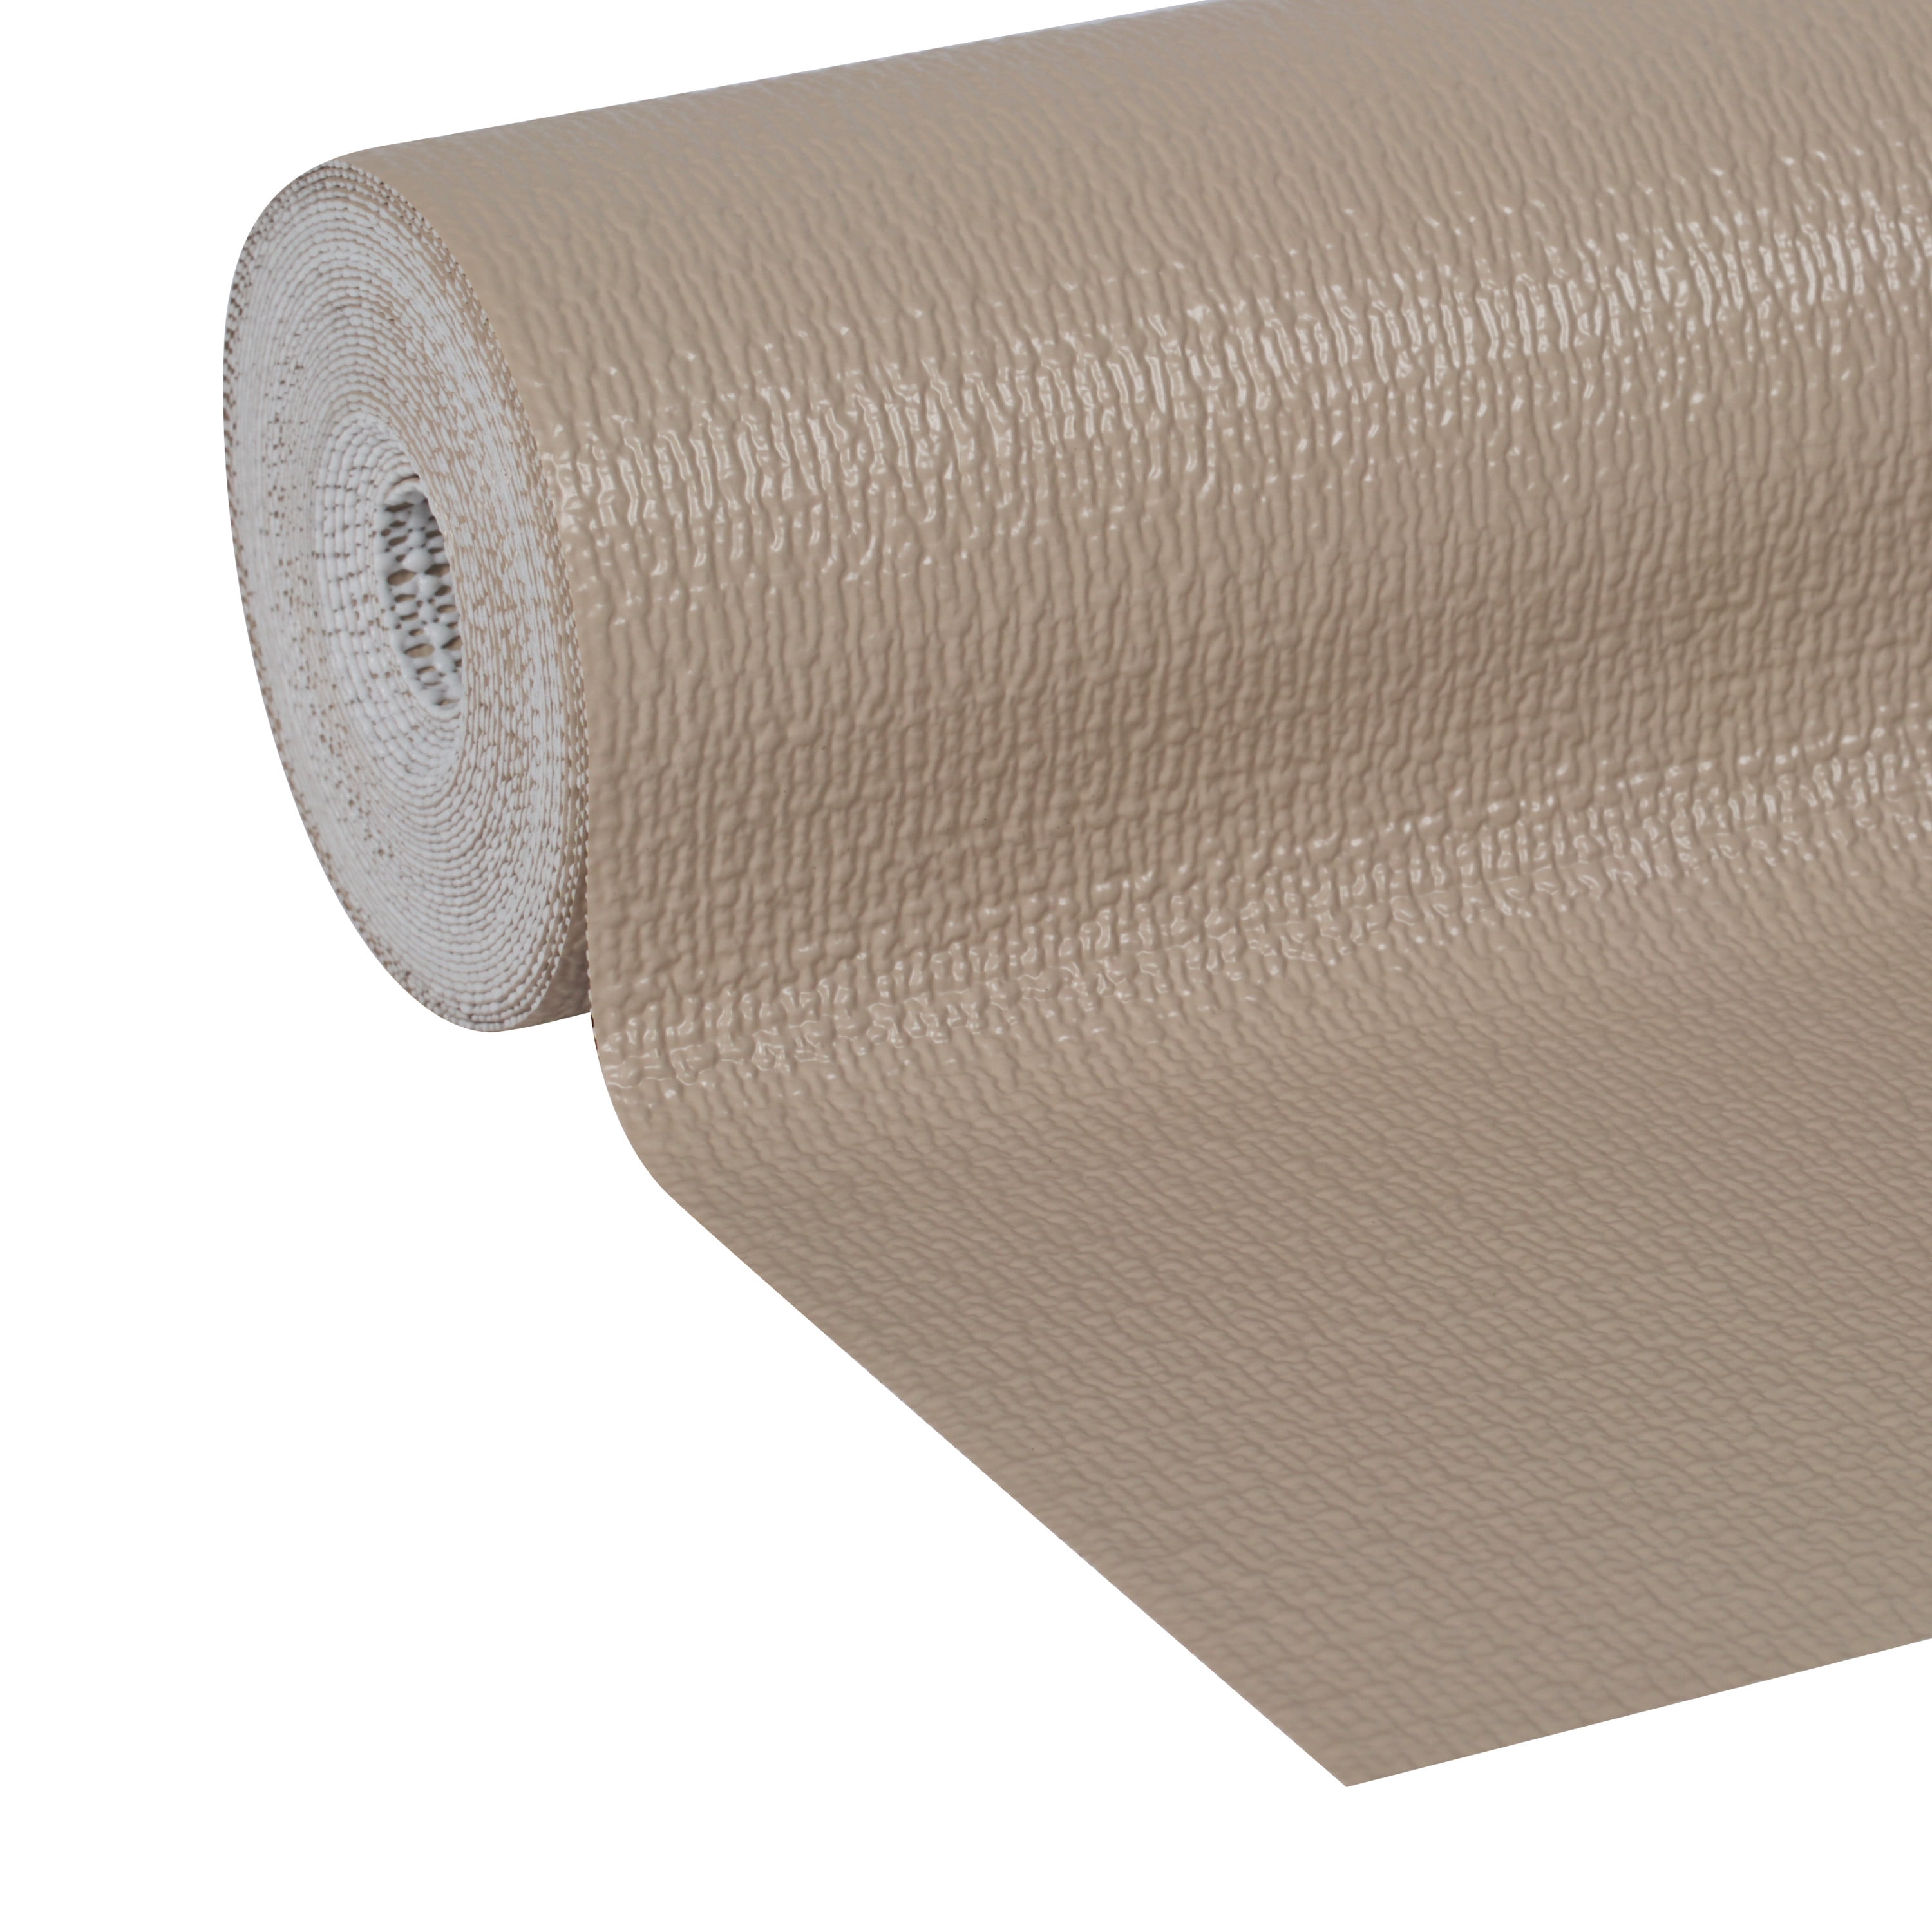 EasyLiner Smooth Top 12 in. x 20 ft. Shelf Liner, Taupe